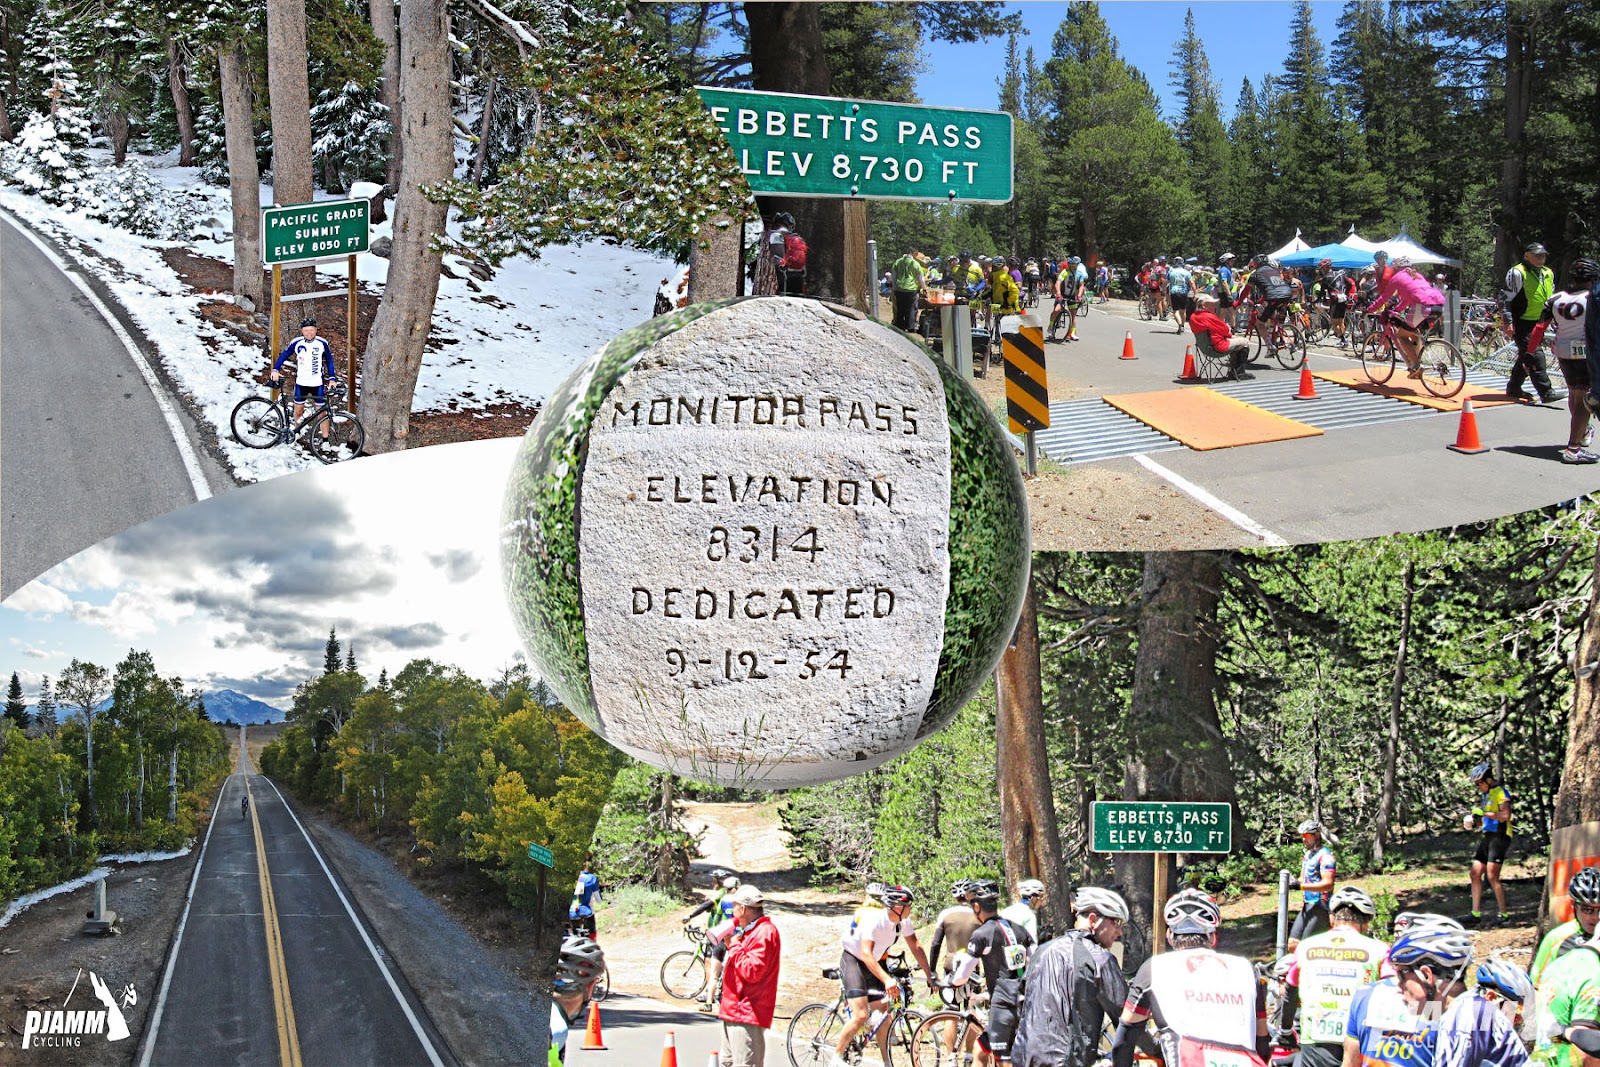 Five passes of the Death Ride - Monitor East, Ebbetts, East, Monitor West, Ebbetts West, Pacific Grade